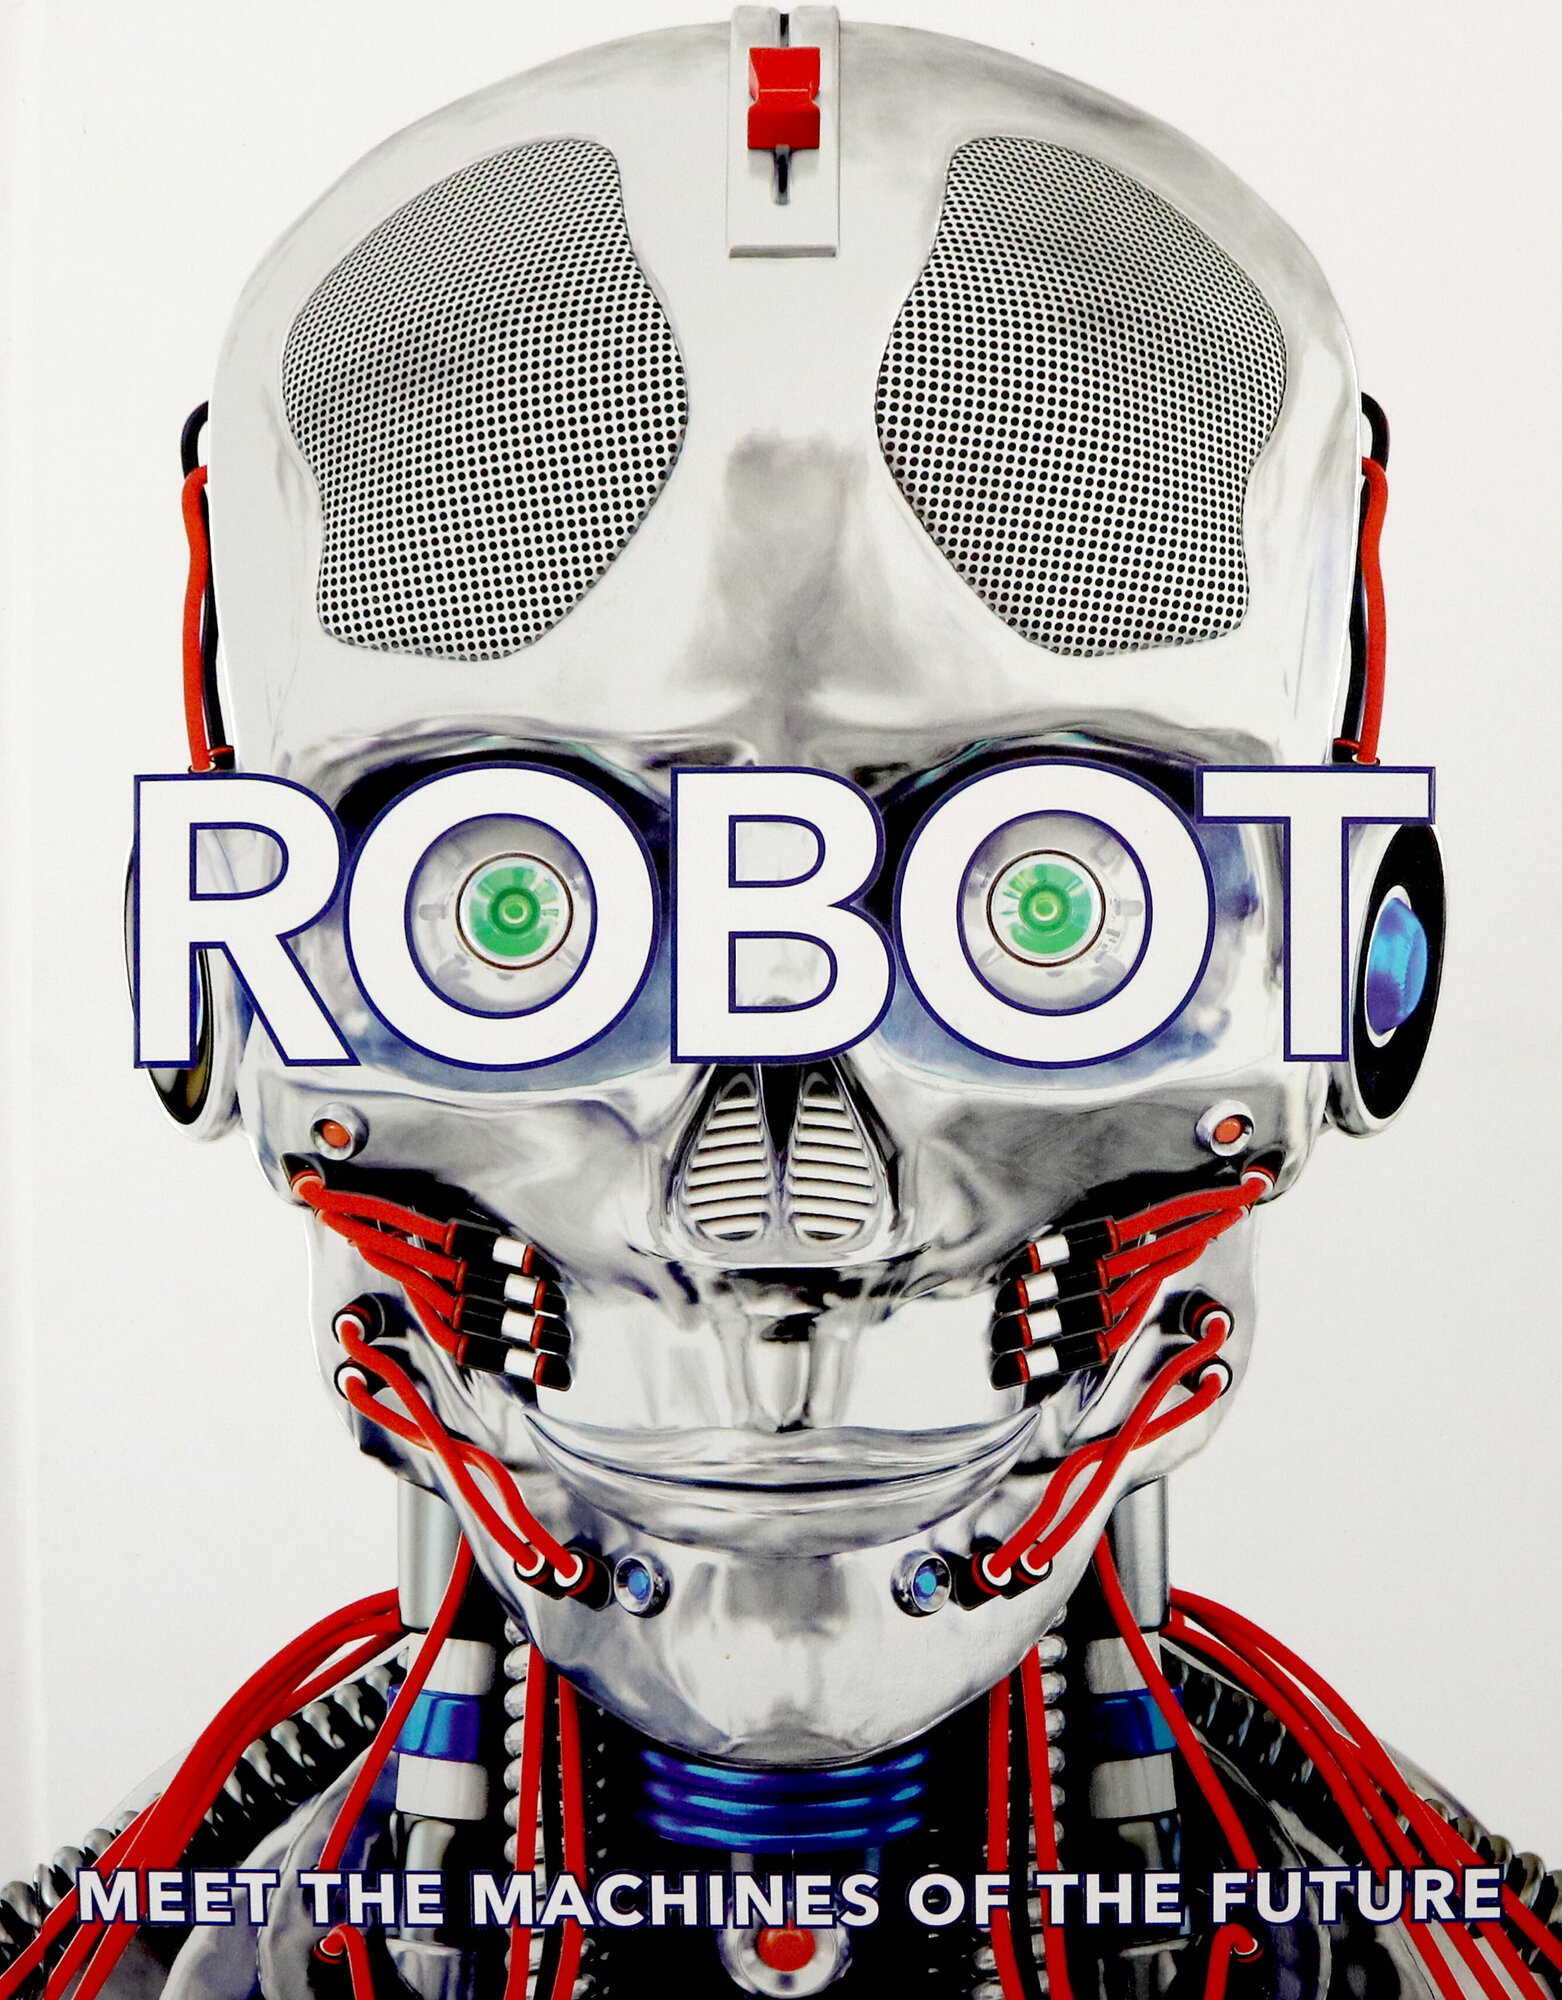 Robot. Meet the Machines of the Future - фото №2